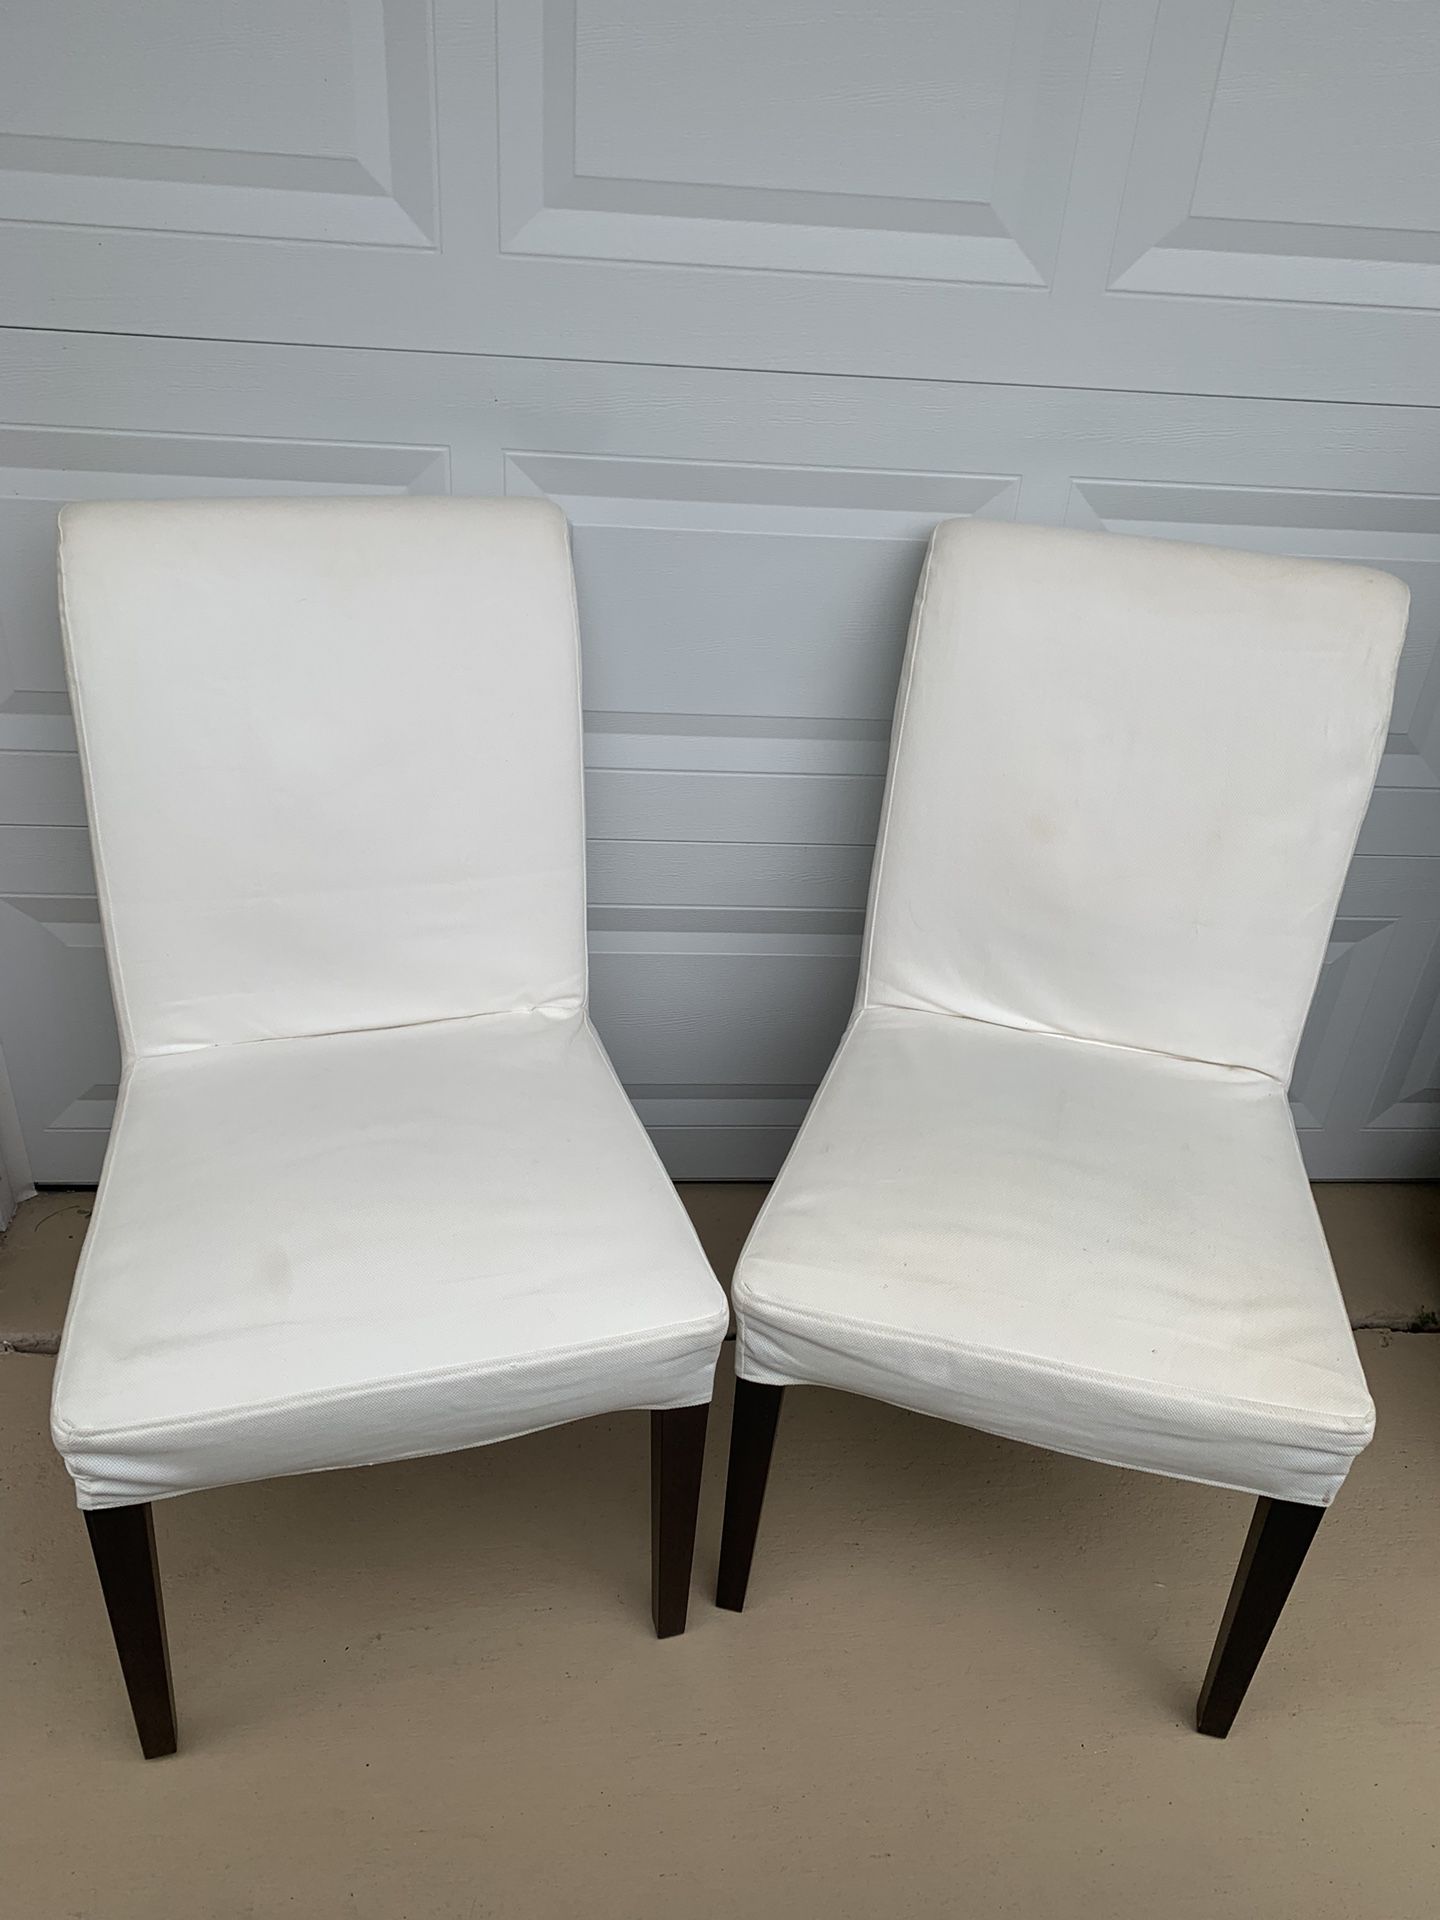 2 Ikea Dining / Desk Chairs